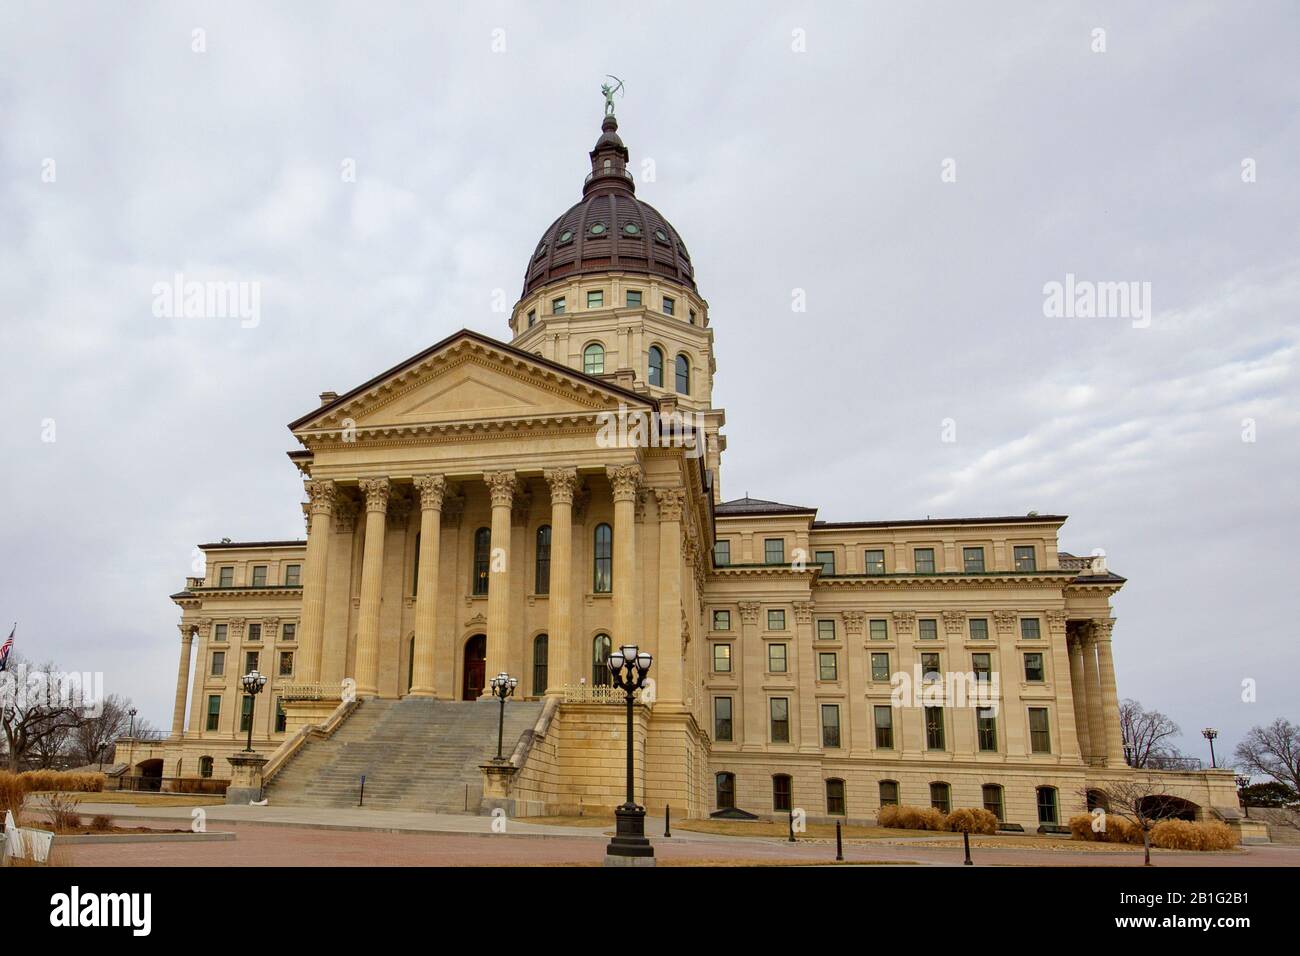 The Kansas State Capitol located in Topeka is the building housing the executive and legislative branches of government for the U.S. state of Kansas. Stock Photo